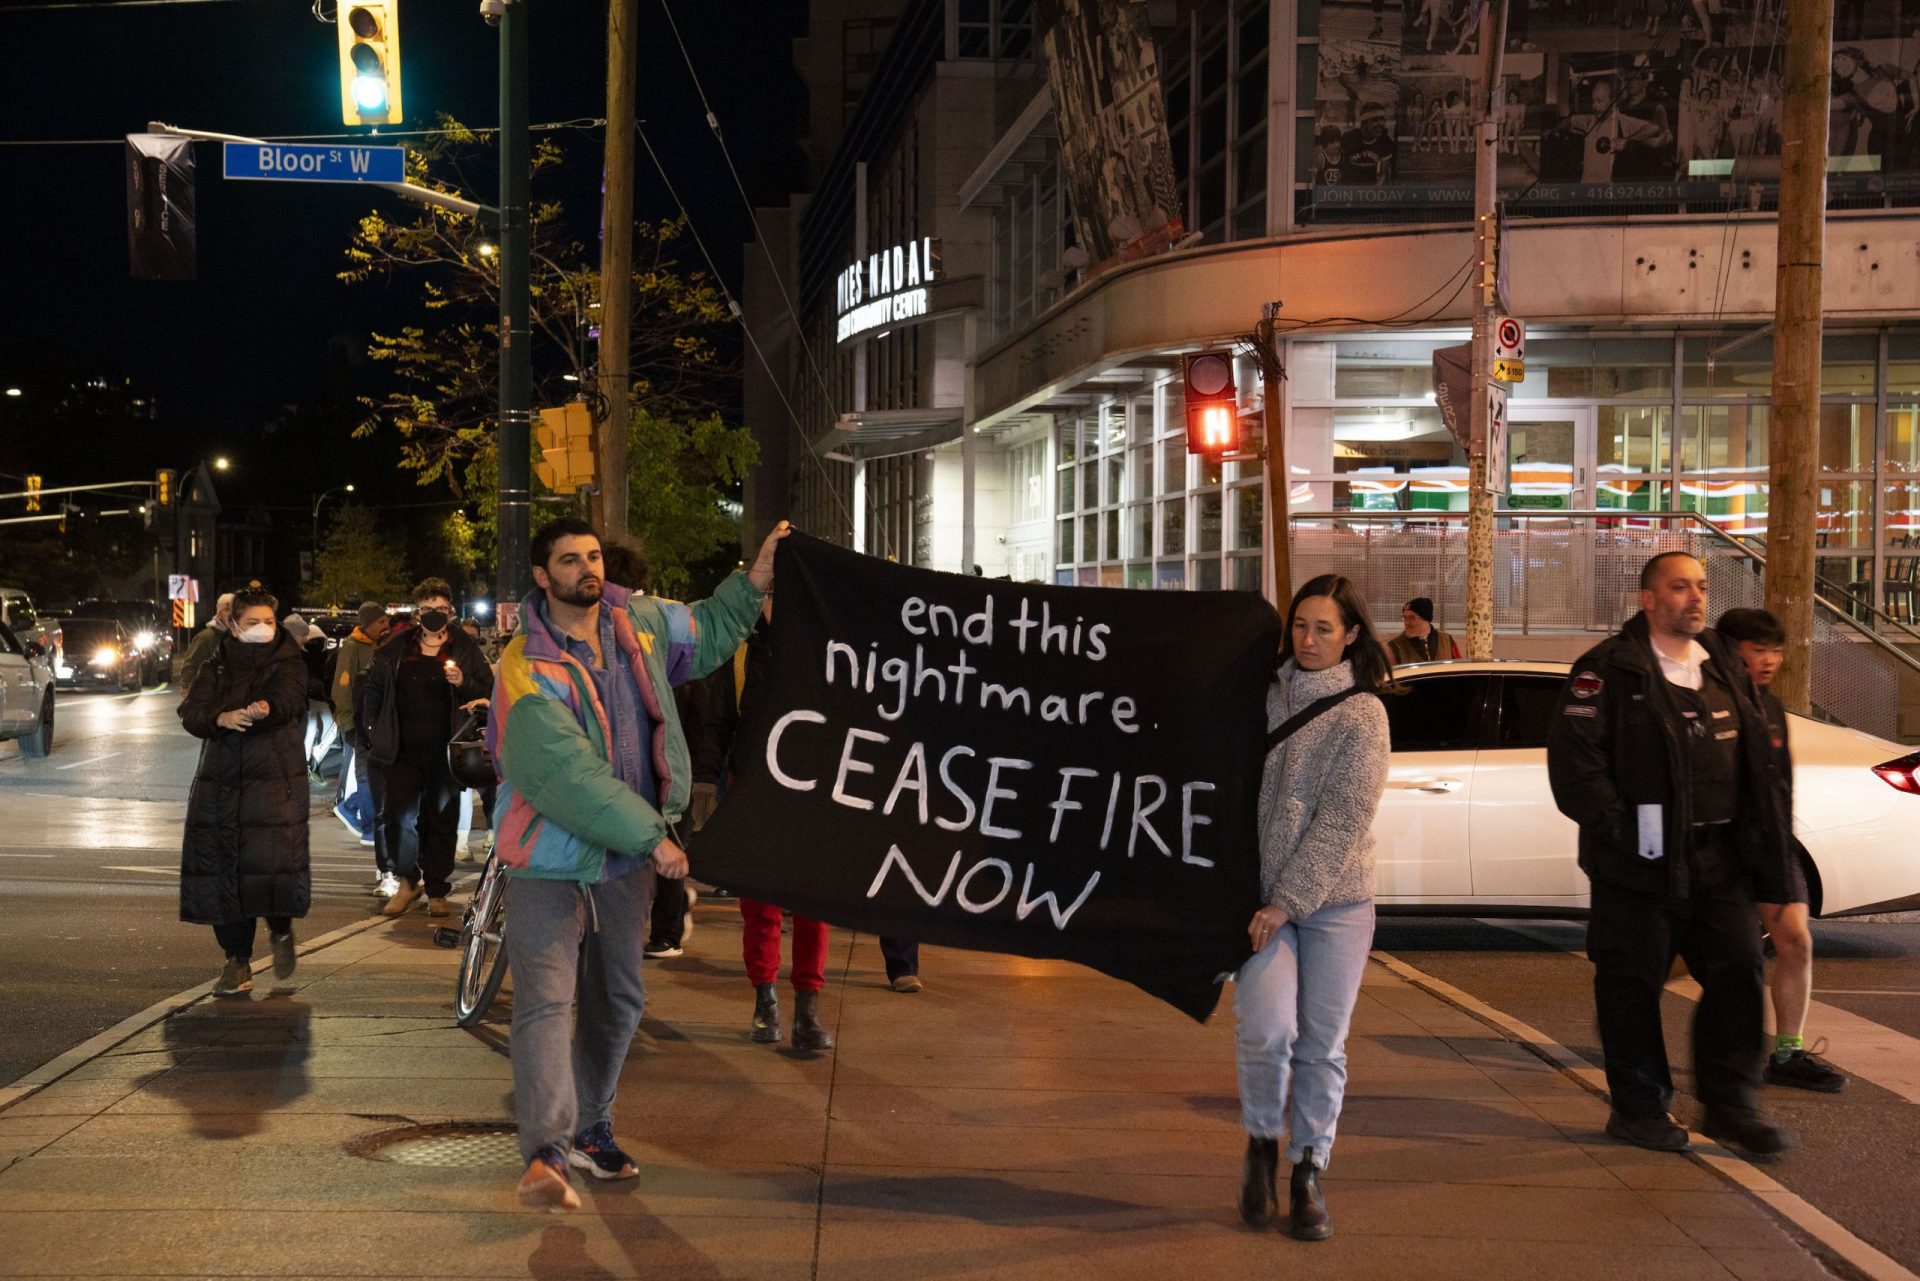 Two people in front of a crowd, walking along crosswalk with a black sign that says "End this nightmare. Ceasefire now."